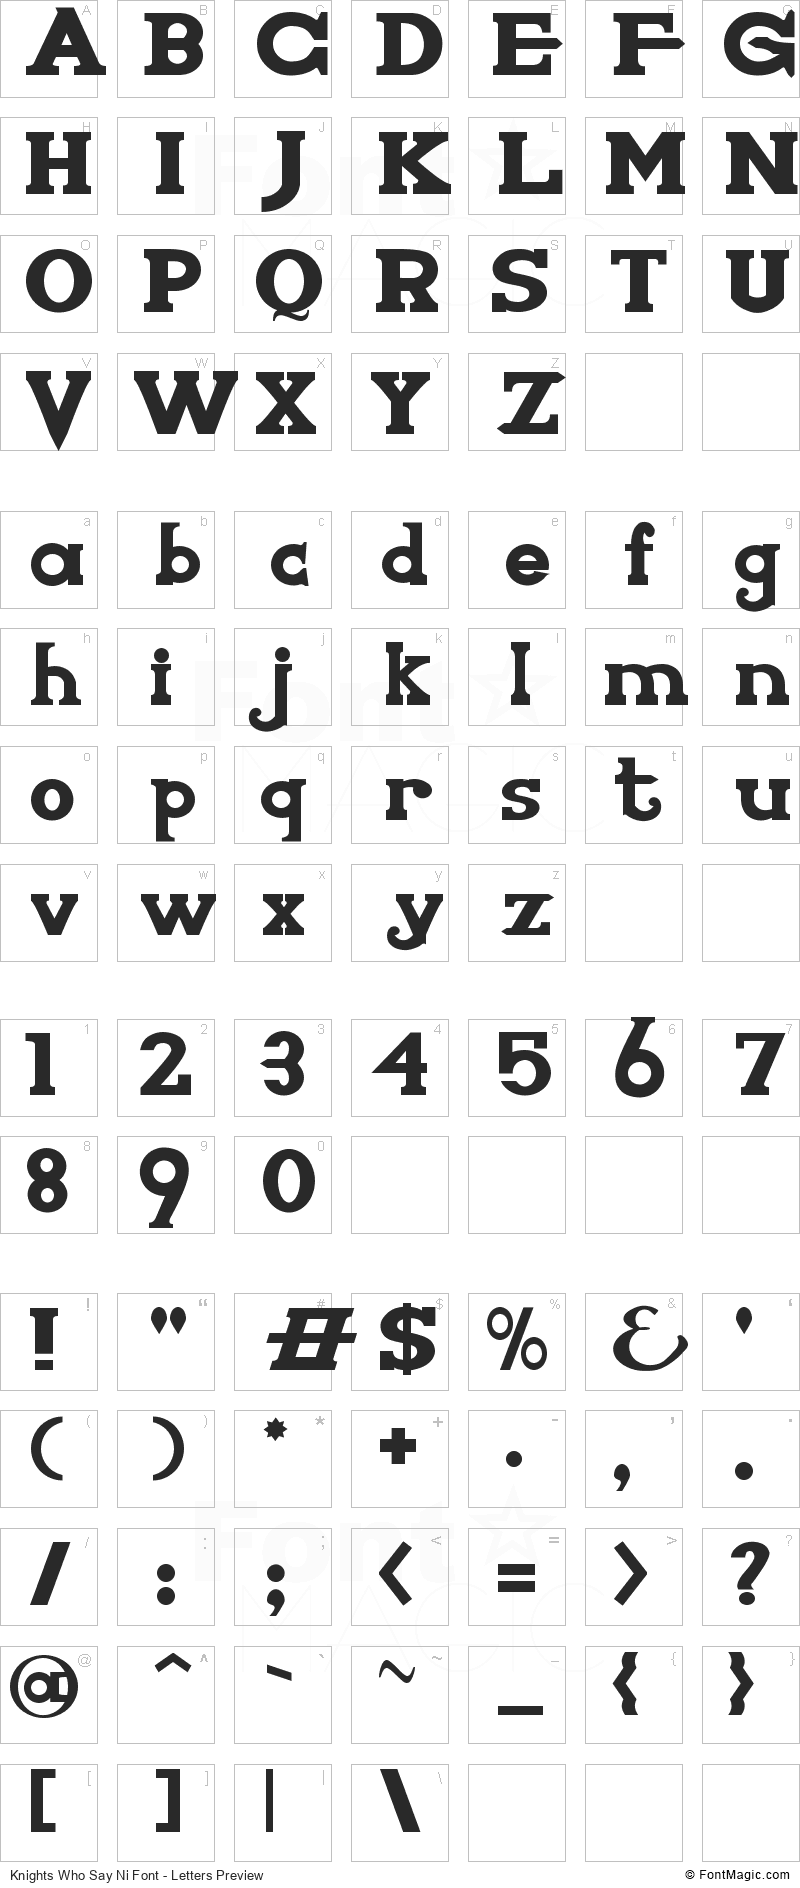 Knights Who Say Ni Font - All Latters Preview Chart